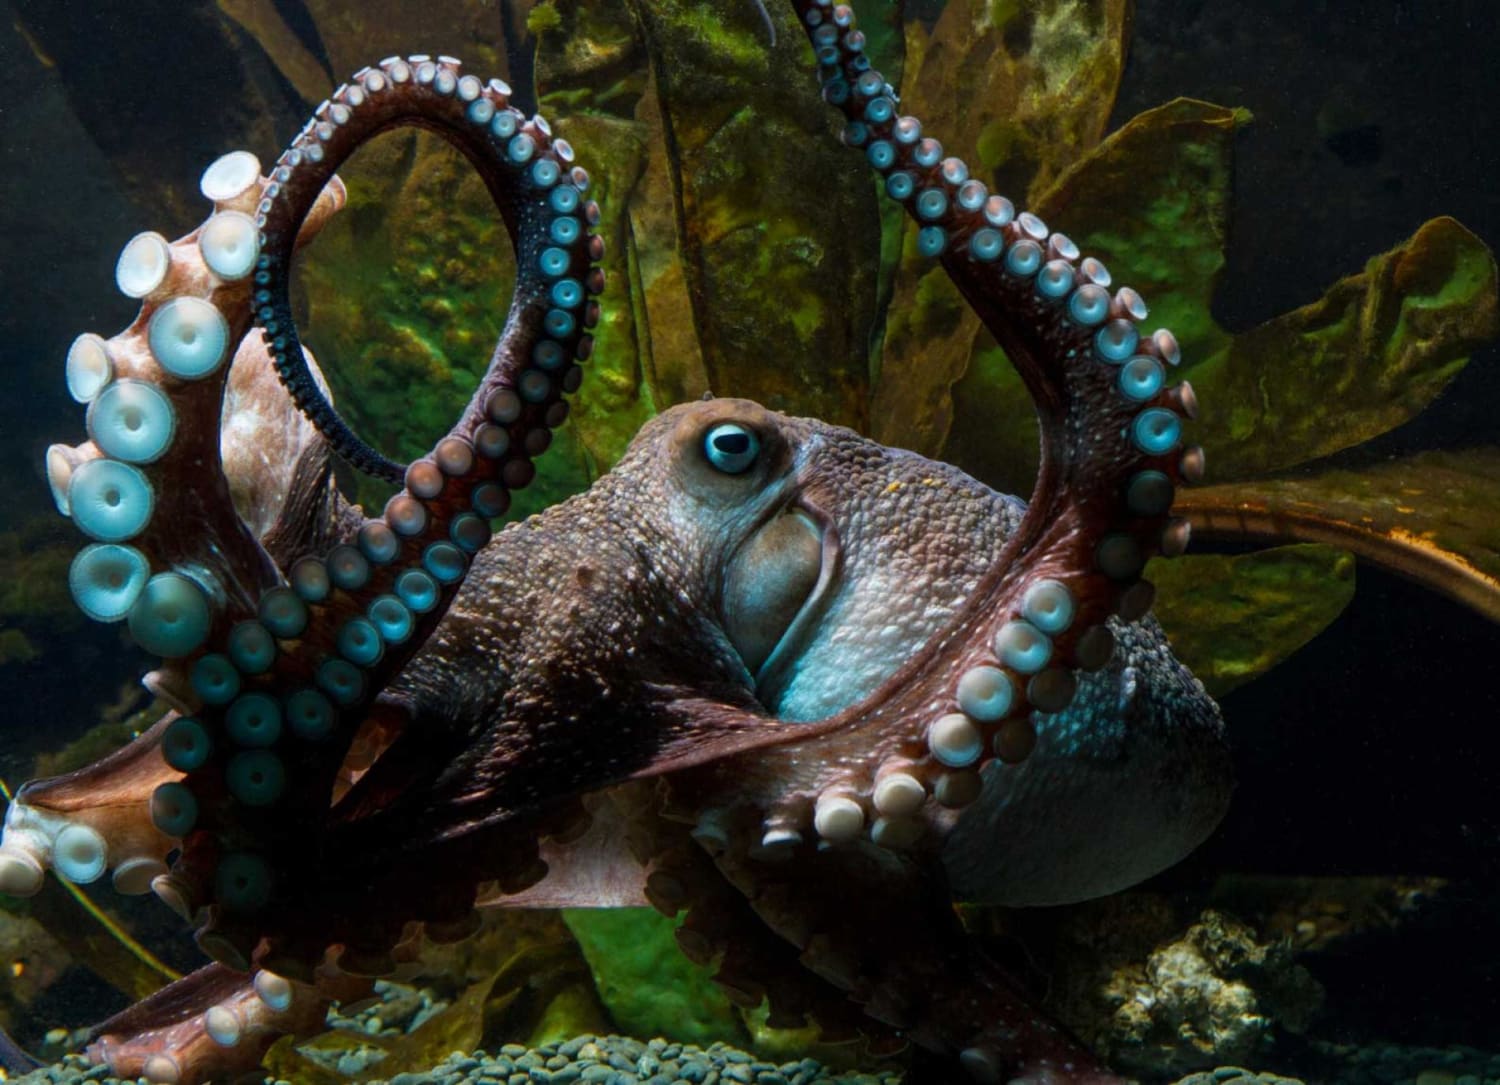 Inky's Daring Escape Shows How Smart Octopuses Are